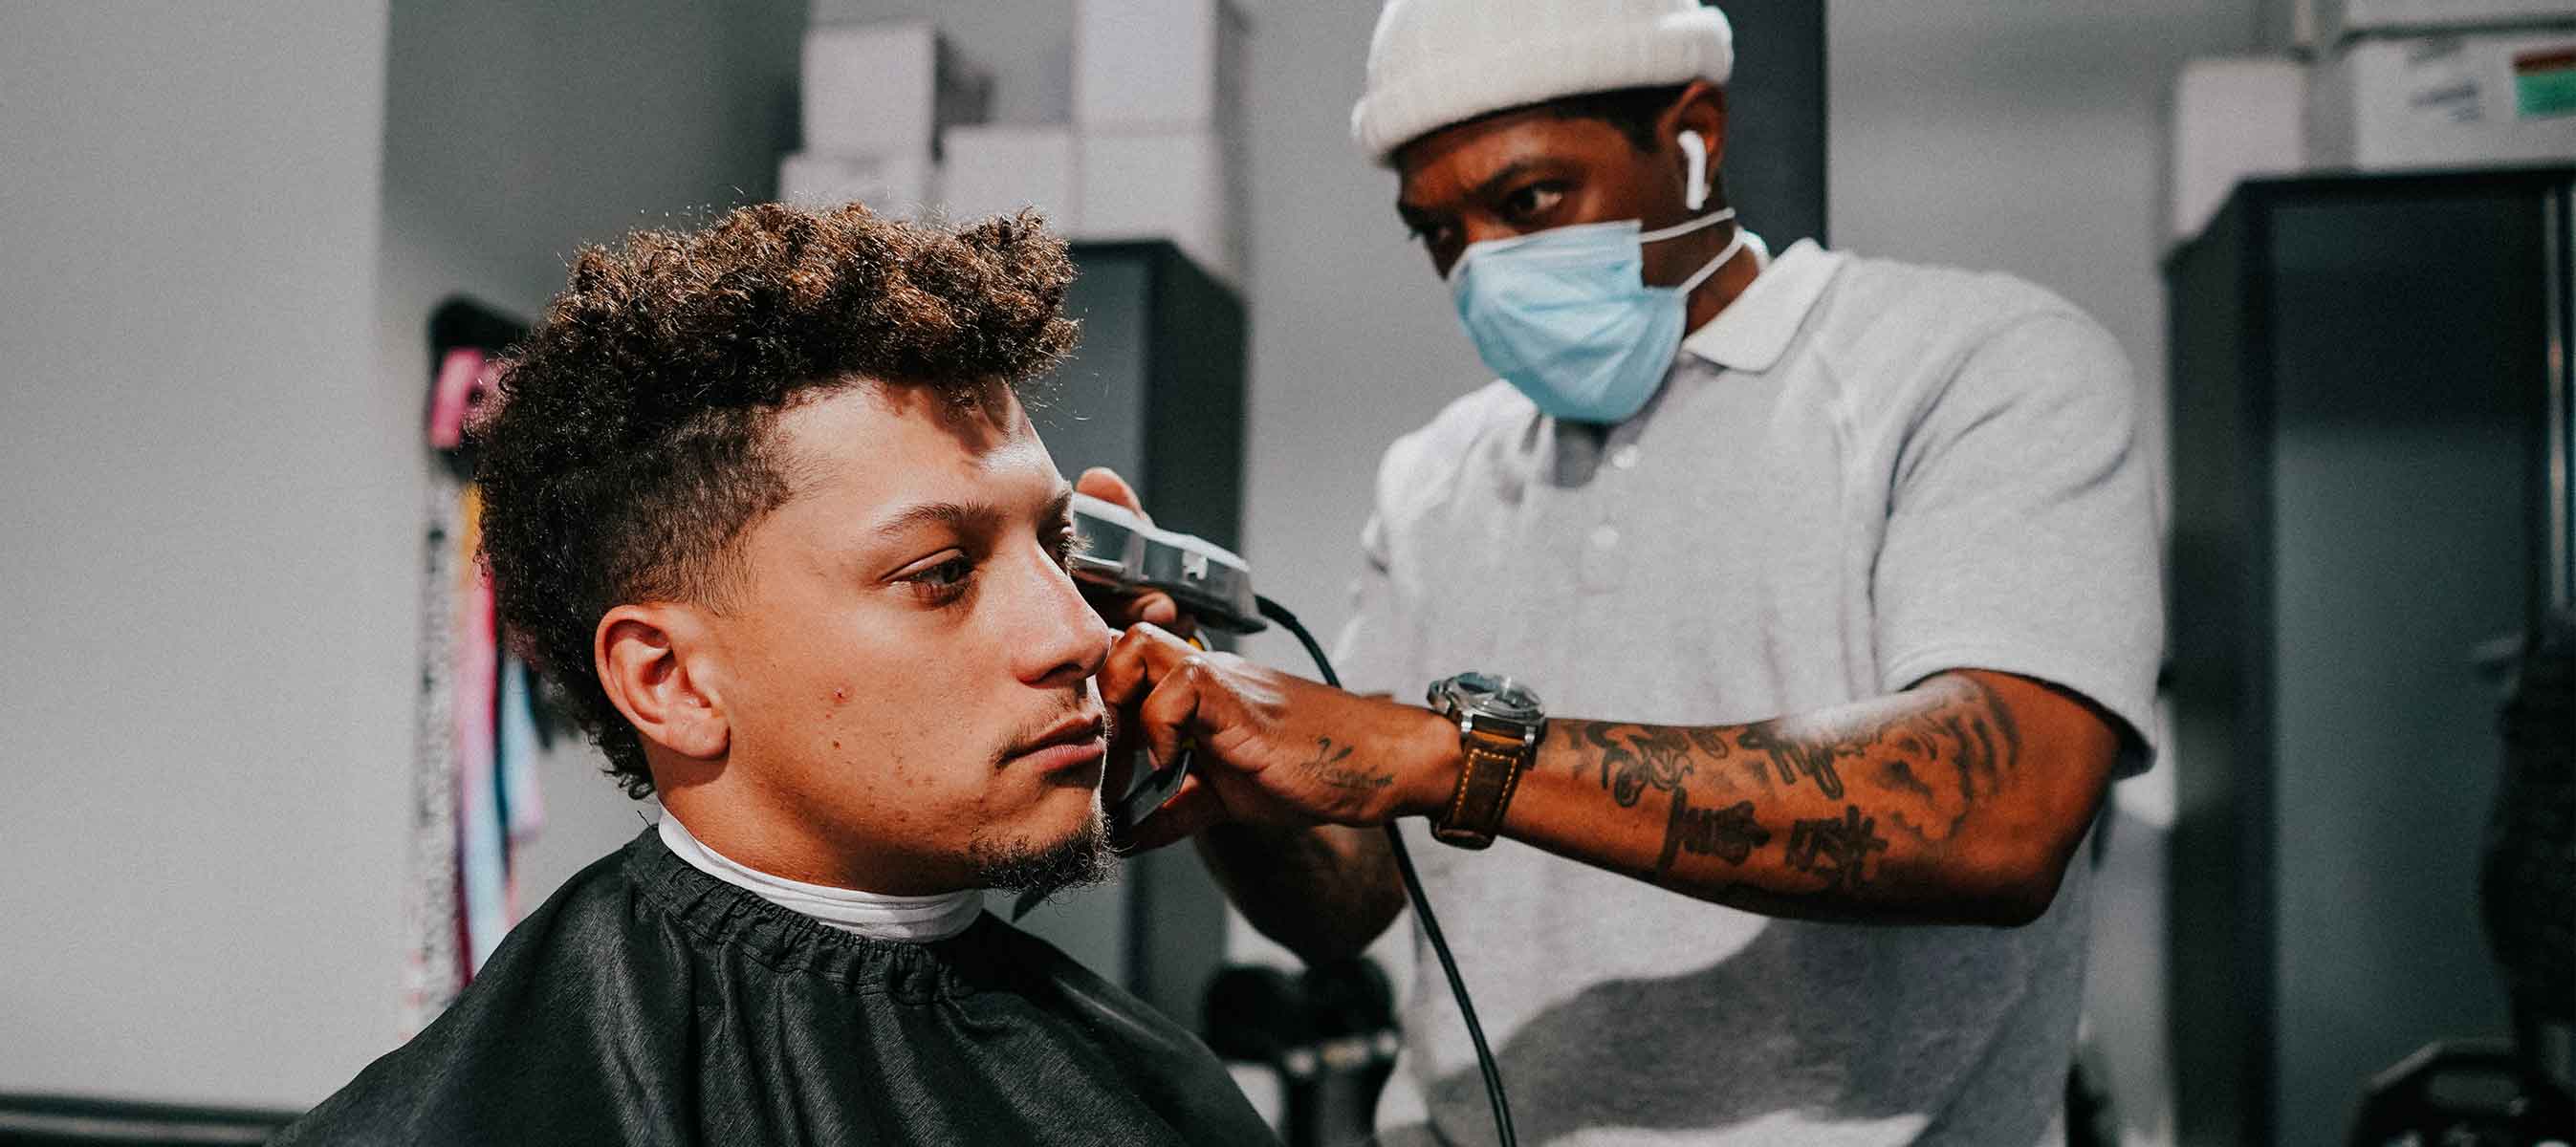 PATRICK MAHOMES HAIRCUT TUTORIAL  Step By Step Burst FadeTutorial For  Beginning Barbers 